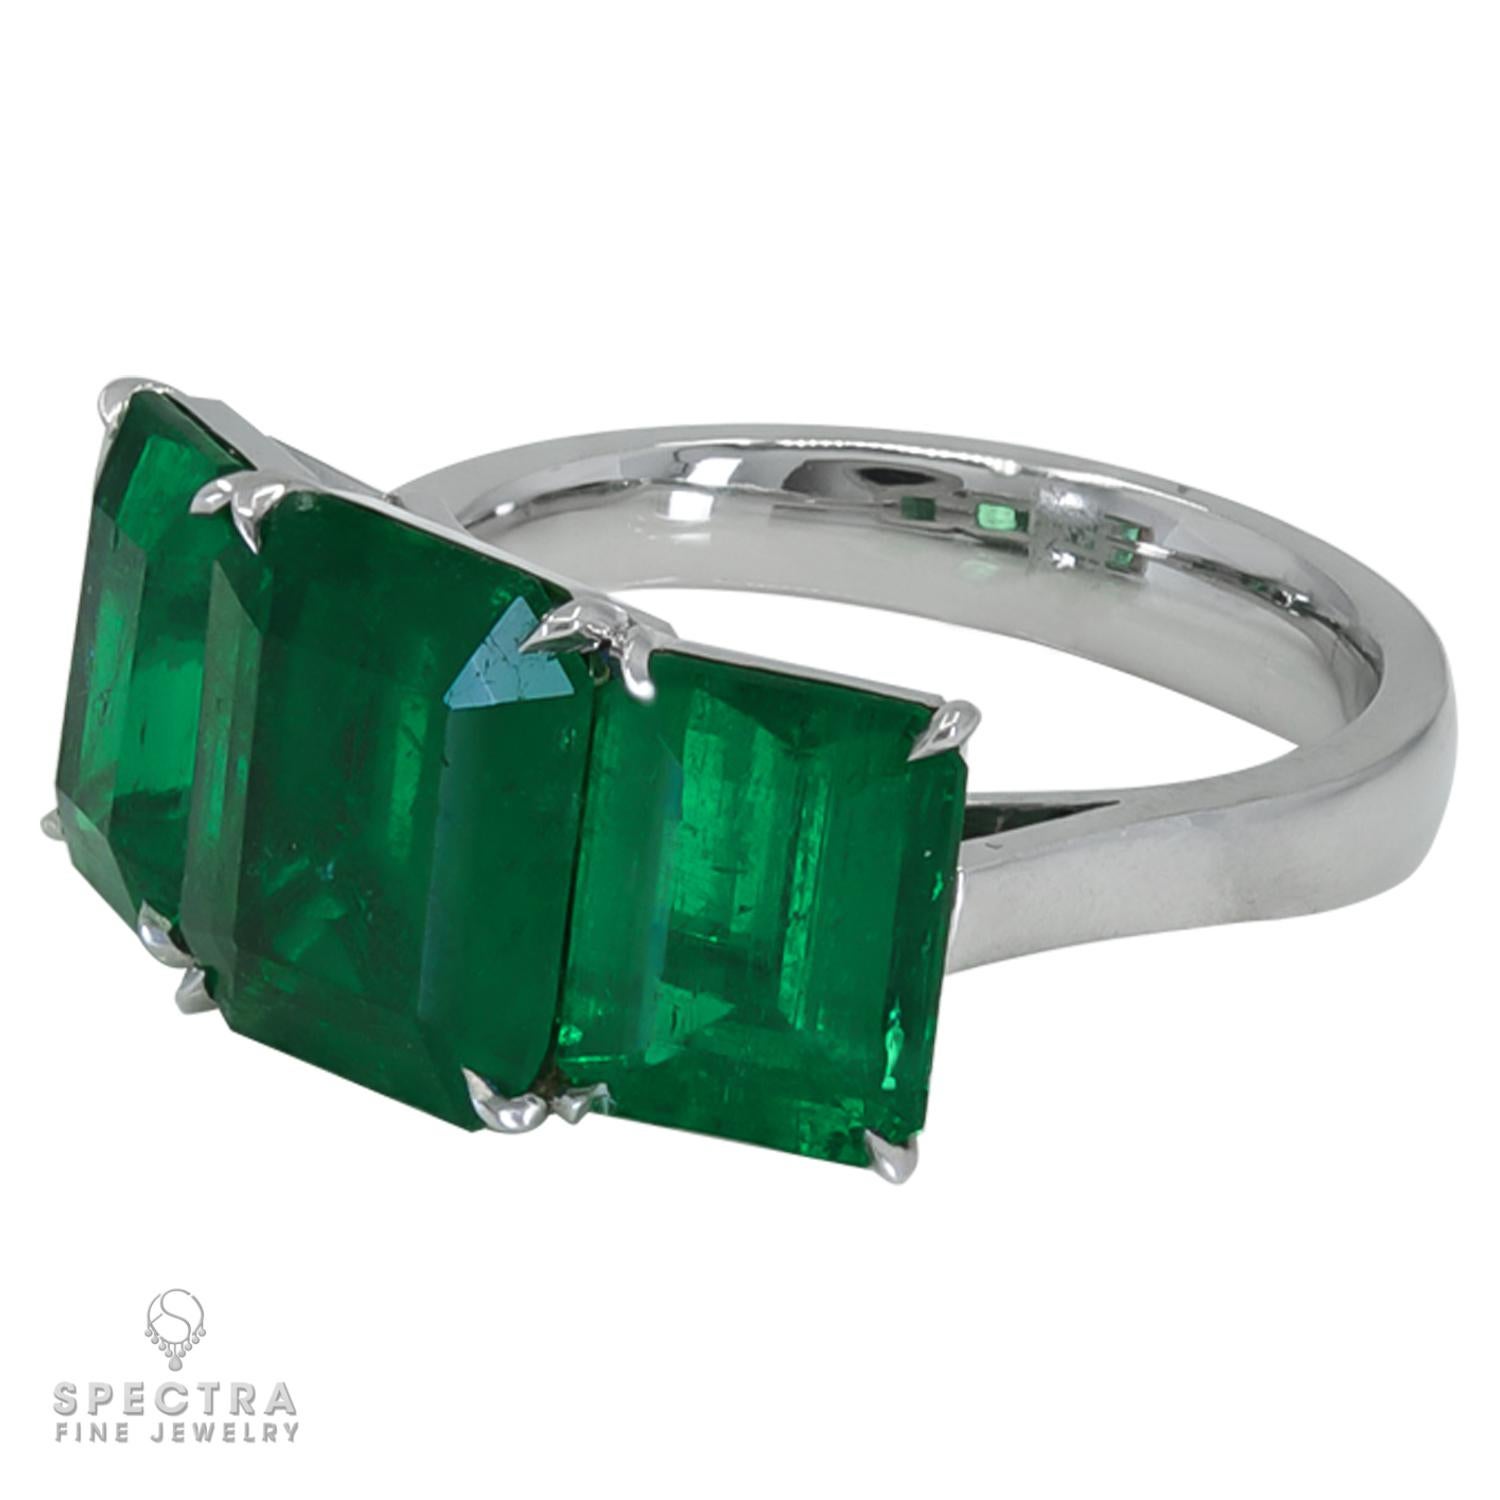 A beautiful ring embellished with three step-cut emeralds mounted in 18K white gold.
Total weight of the emeralds is 6.52 carats.
The emeralds are certified by GRS lab, stating that they are Colombian with minor clarity enhancement. 
Two vividly